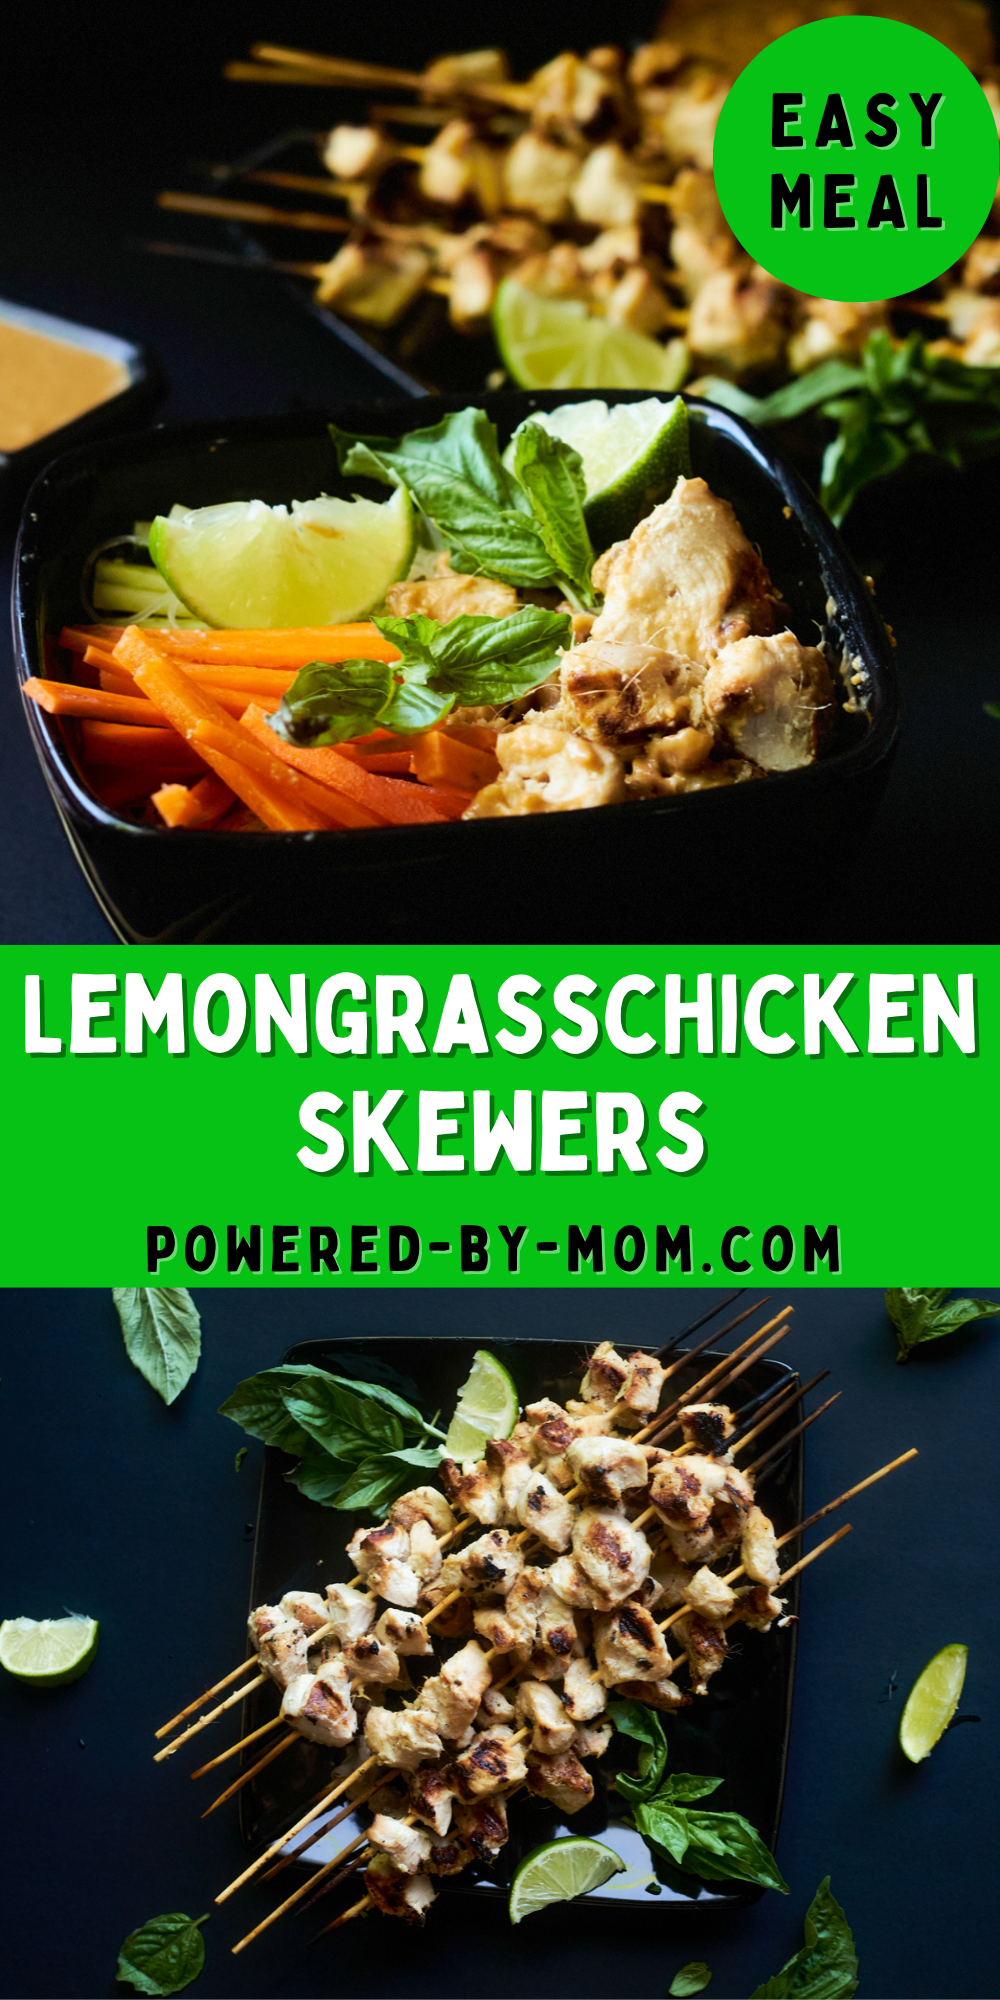 These Vietnamese Lemongrass Chicken Skewers are so scrumptious they might just become your new favourite summer recipe. Fresh lemongrass, with its delicate notes of lemon, ginger and mint paired with the rest of the marinade ingredients and tender grilled chicken breast bites and served with peanut sauce creates a delicious meal.